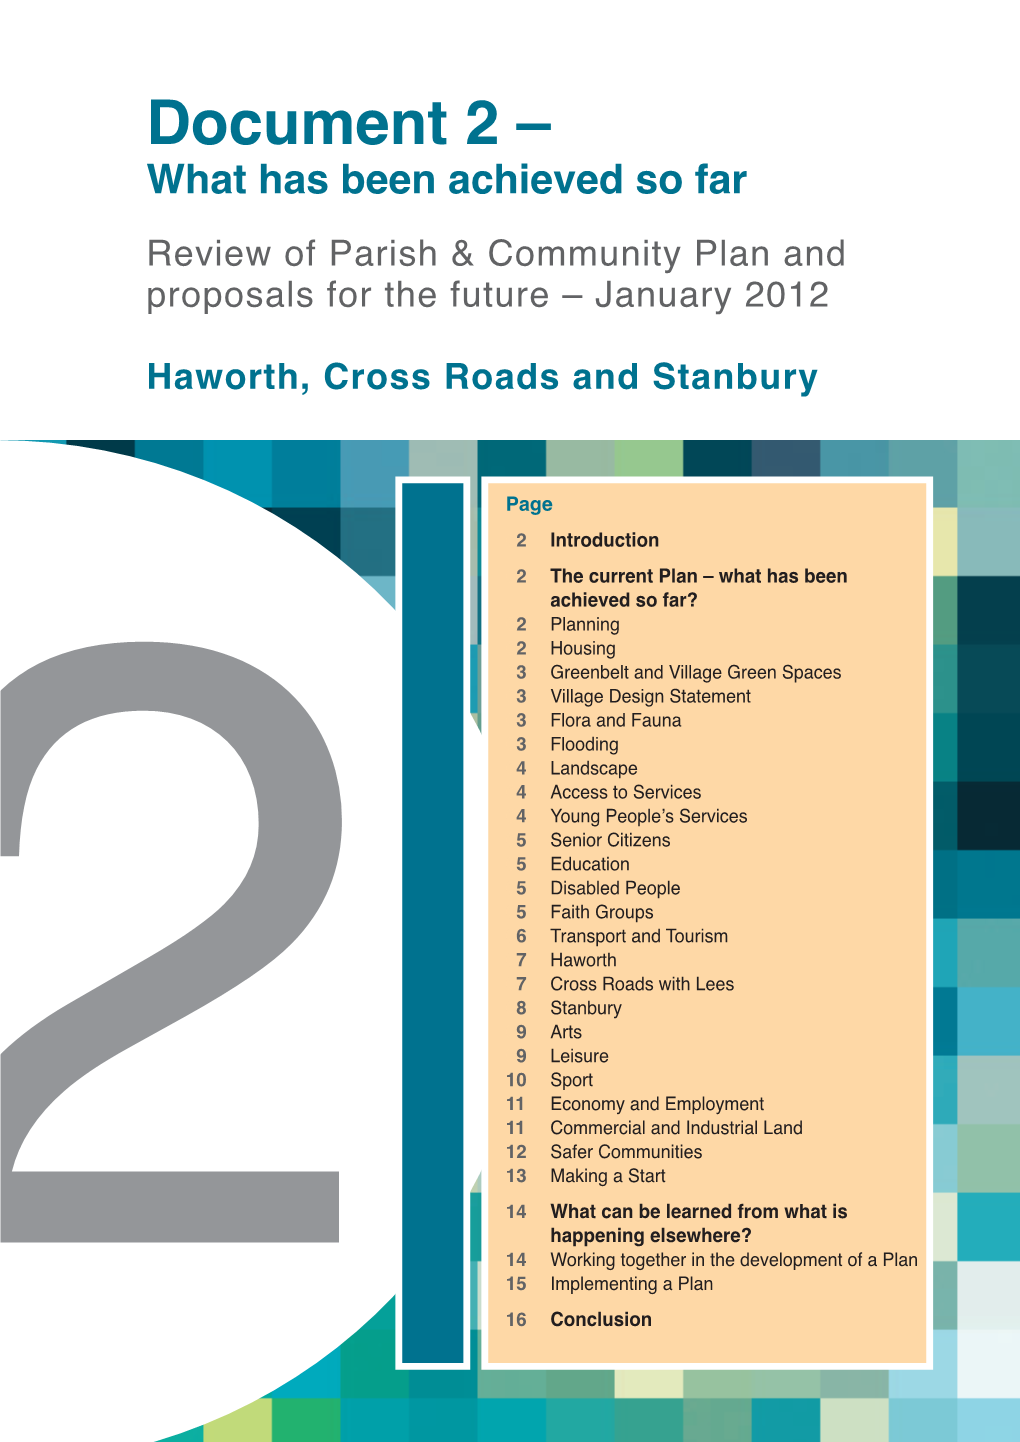 Document 2 – What Has Been Achieved So Far Review of Parish & Community Plan and Proposals for the Future – January 2012